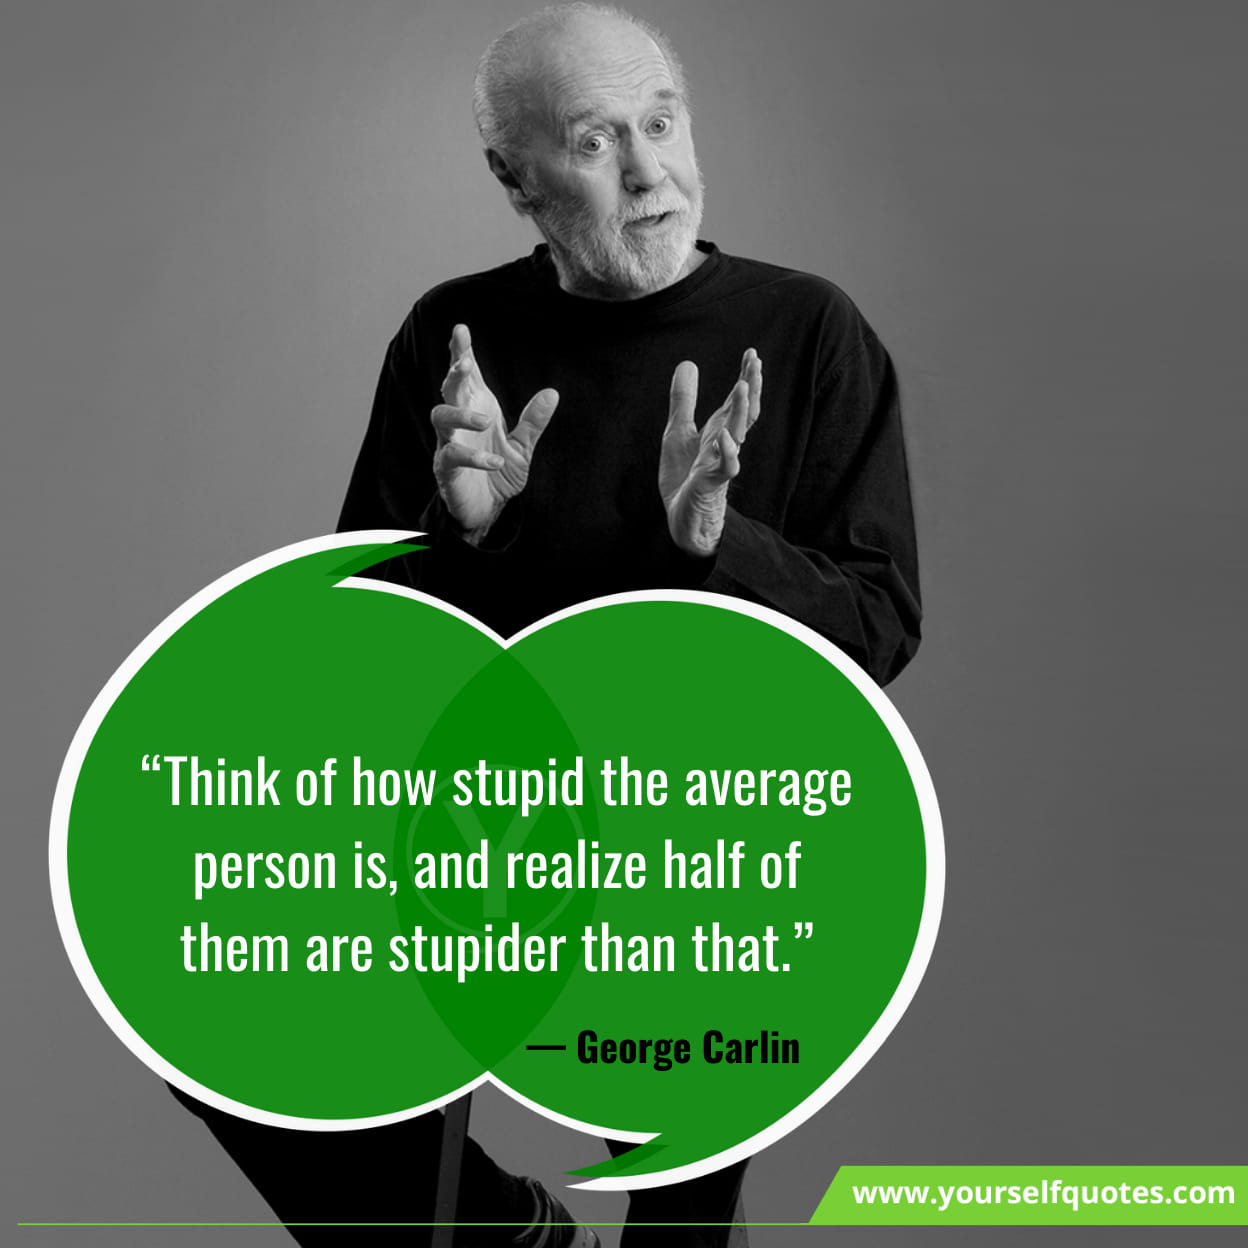 Best Quotes By George Carlin 